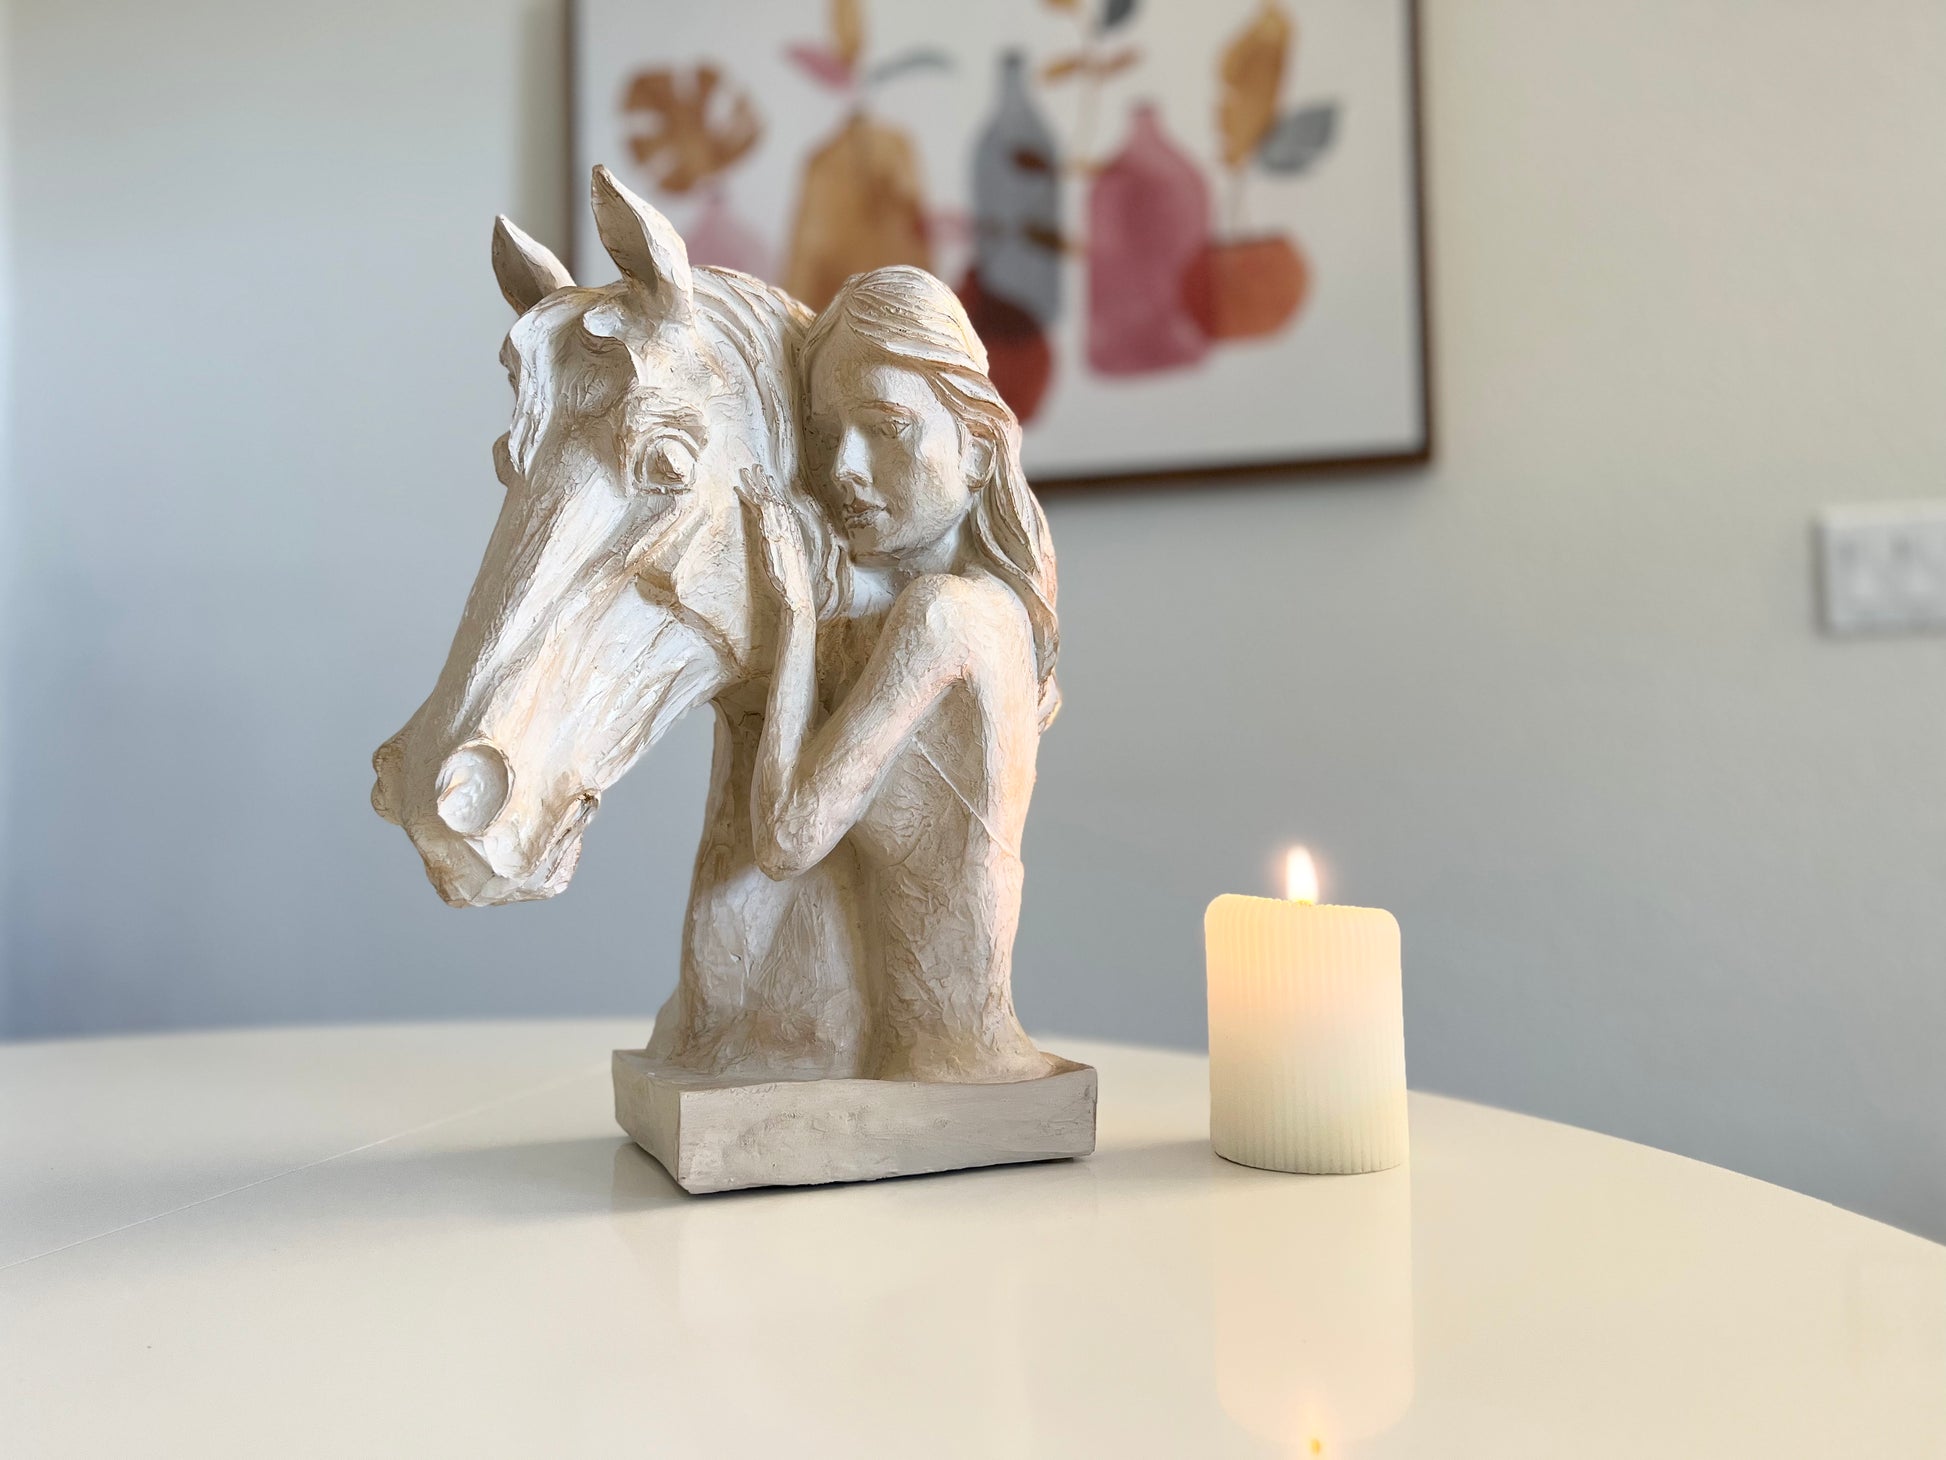 Decorative horse and woman statue symbolizing equestrian spirit, available in beige and beige gold colors.